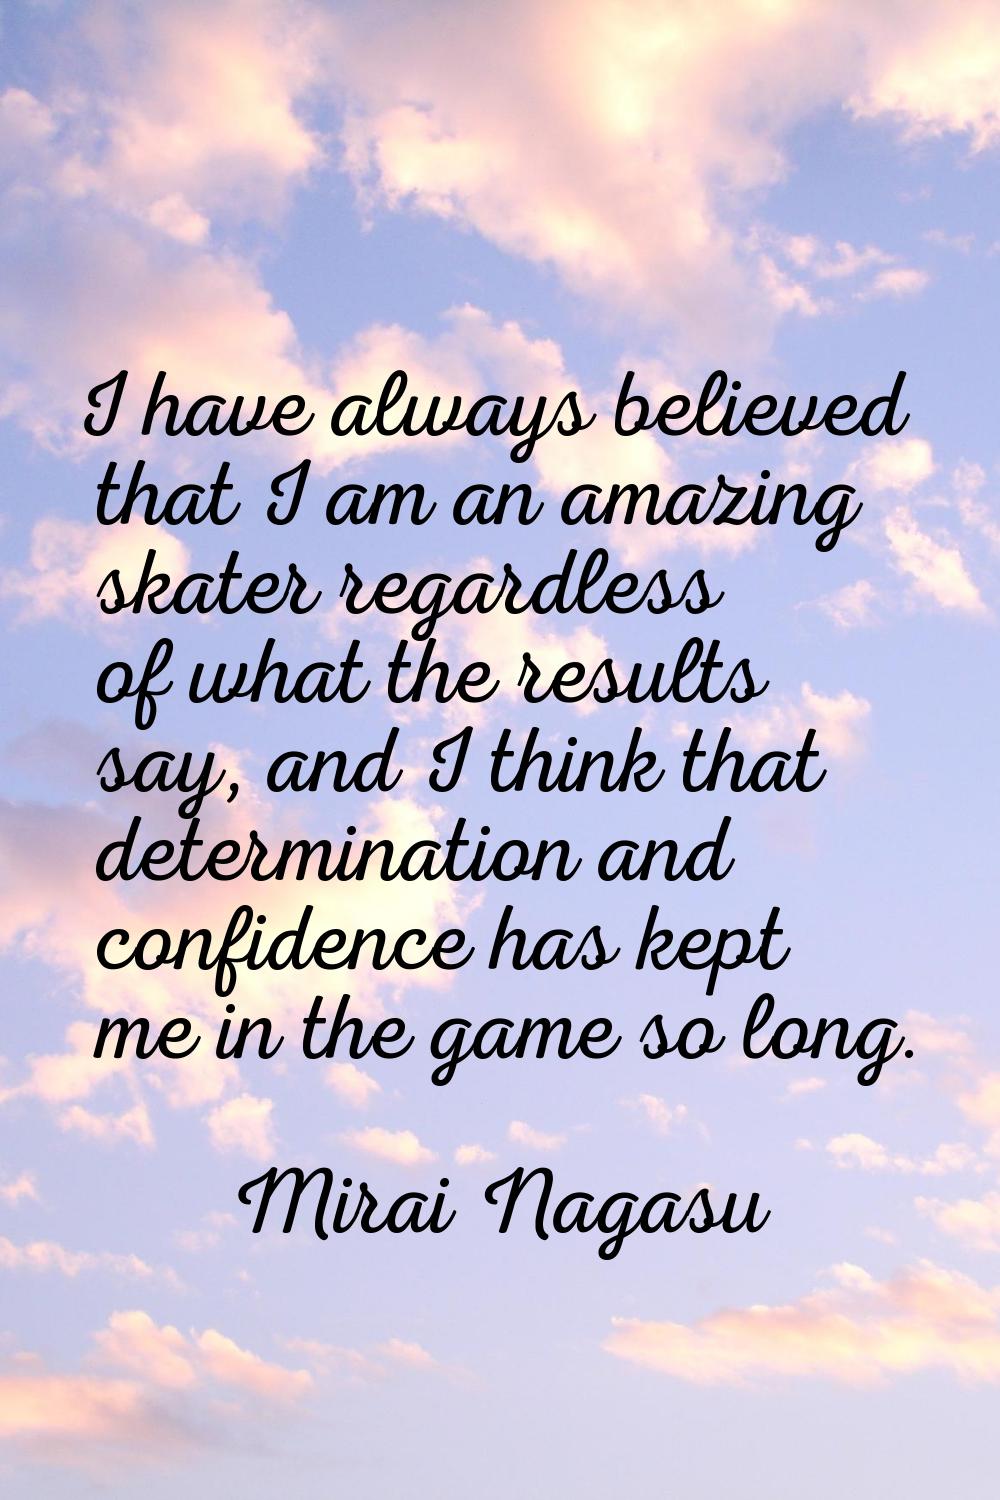 I have always believed that I am an amazing skater regardless of what the results say, and I think 